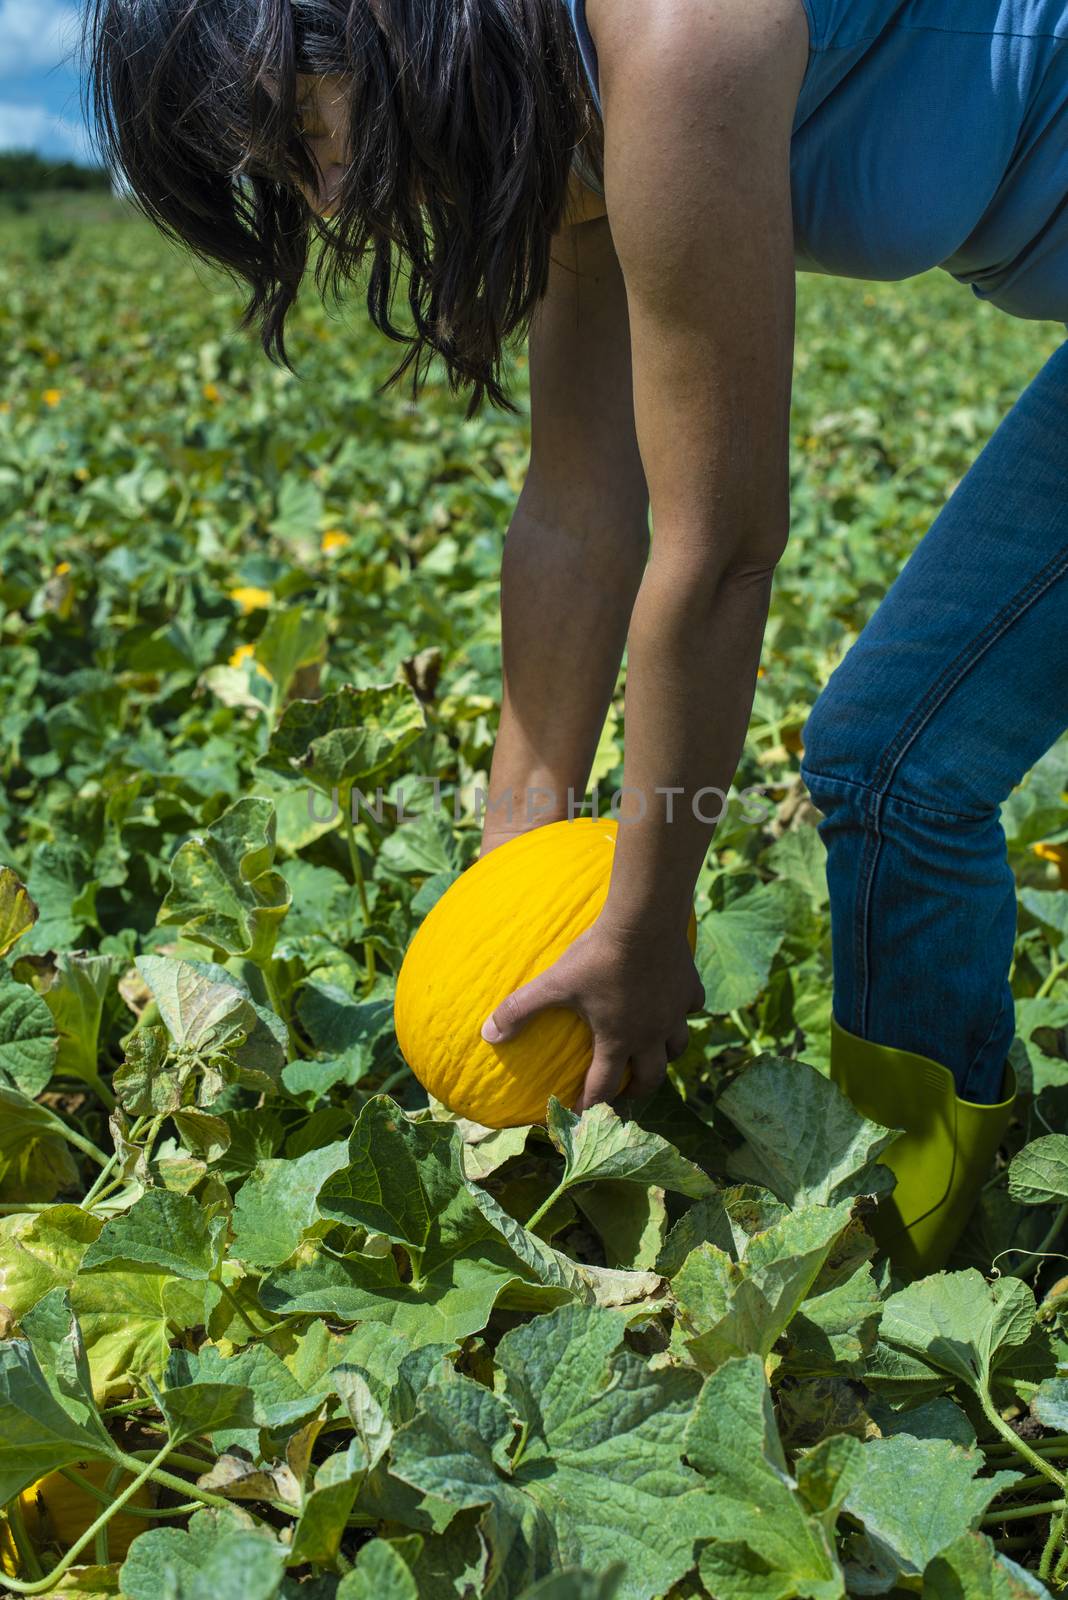 Harvest canary melons. Sunny day. Picking yellow melons in plant by deyan_georgiev